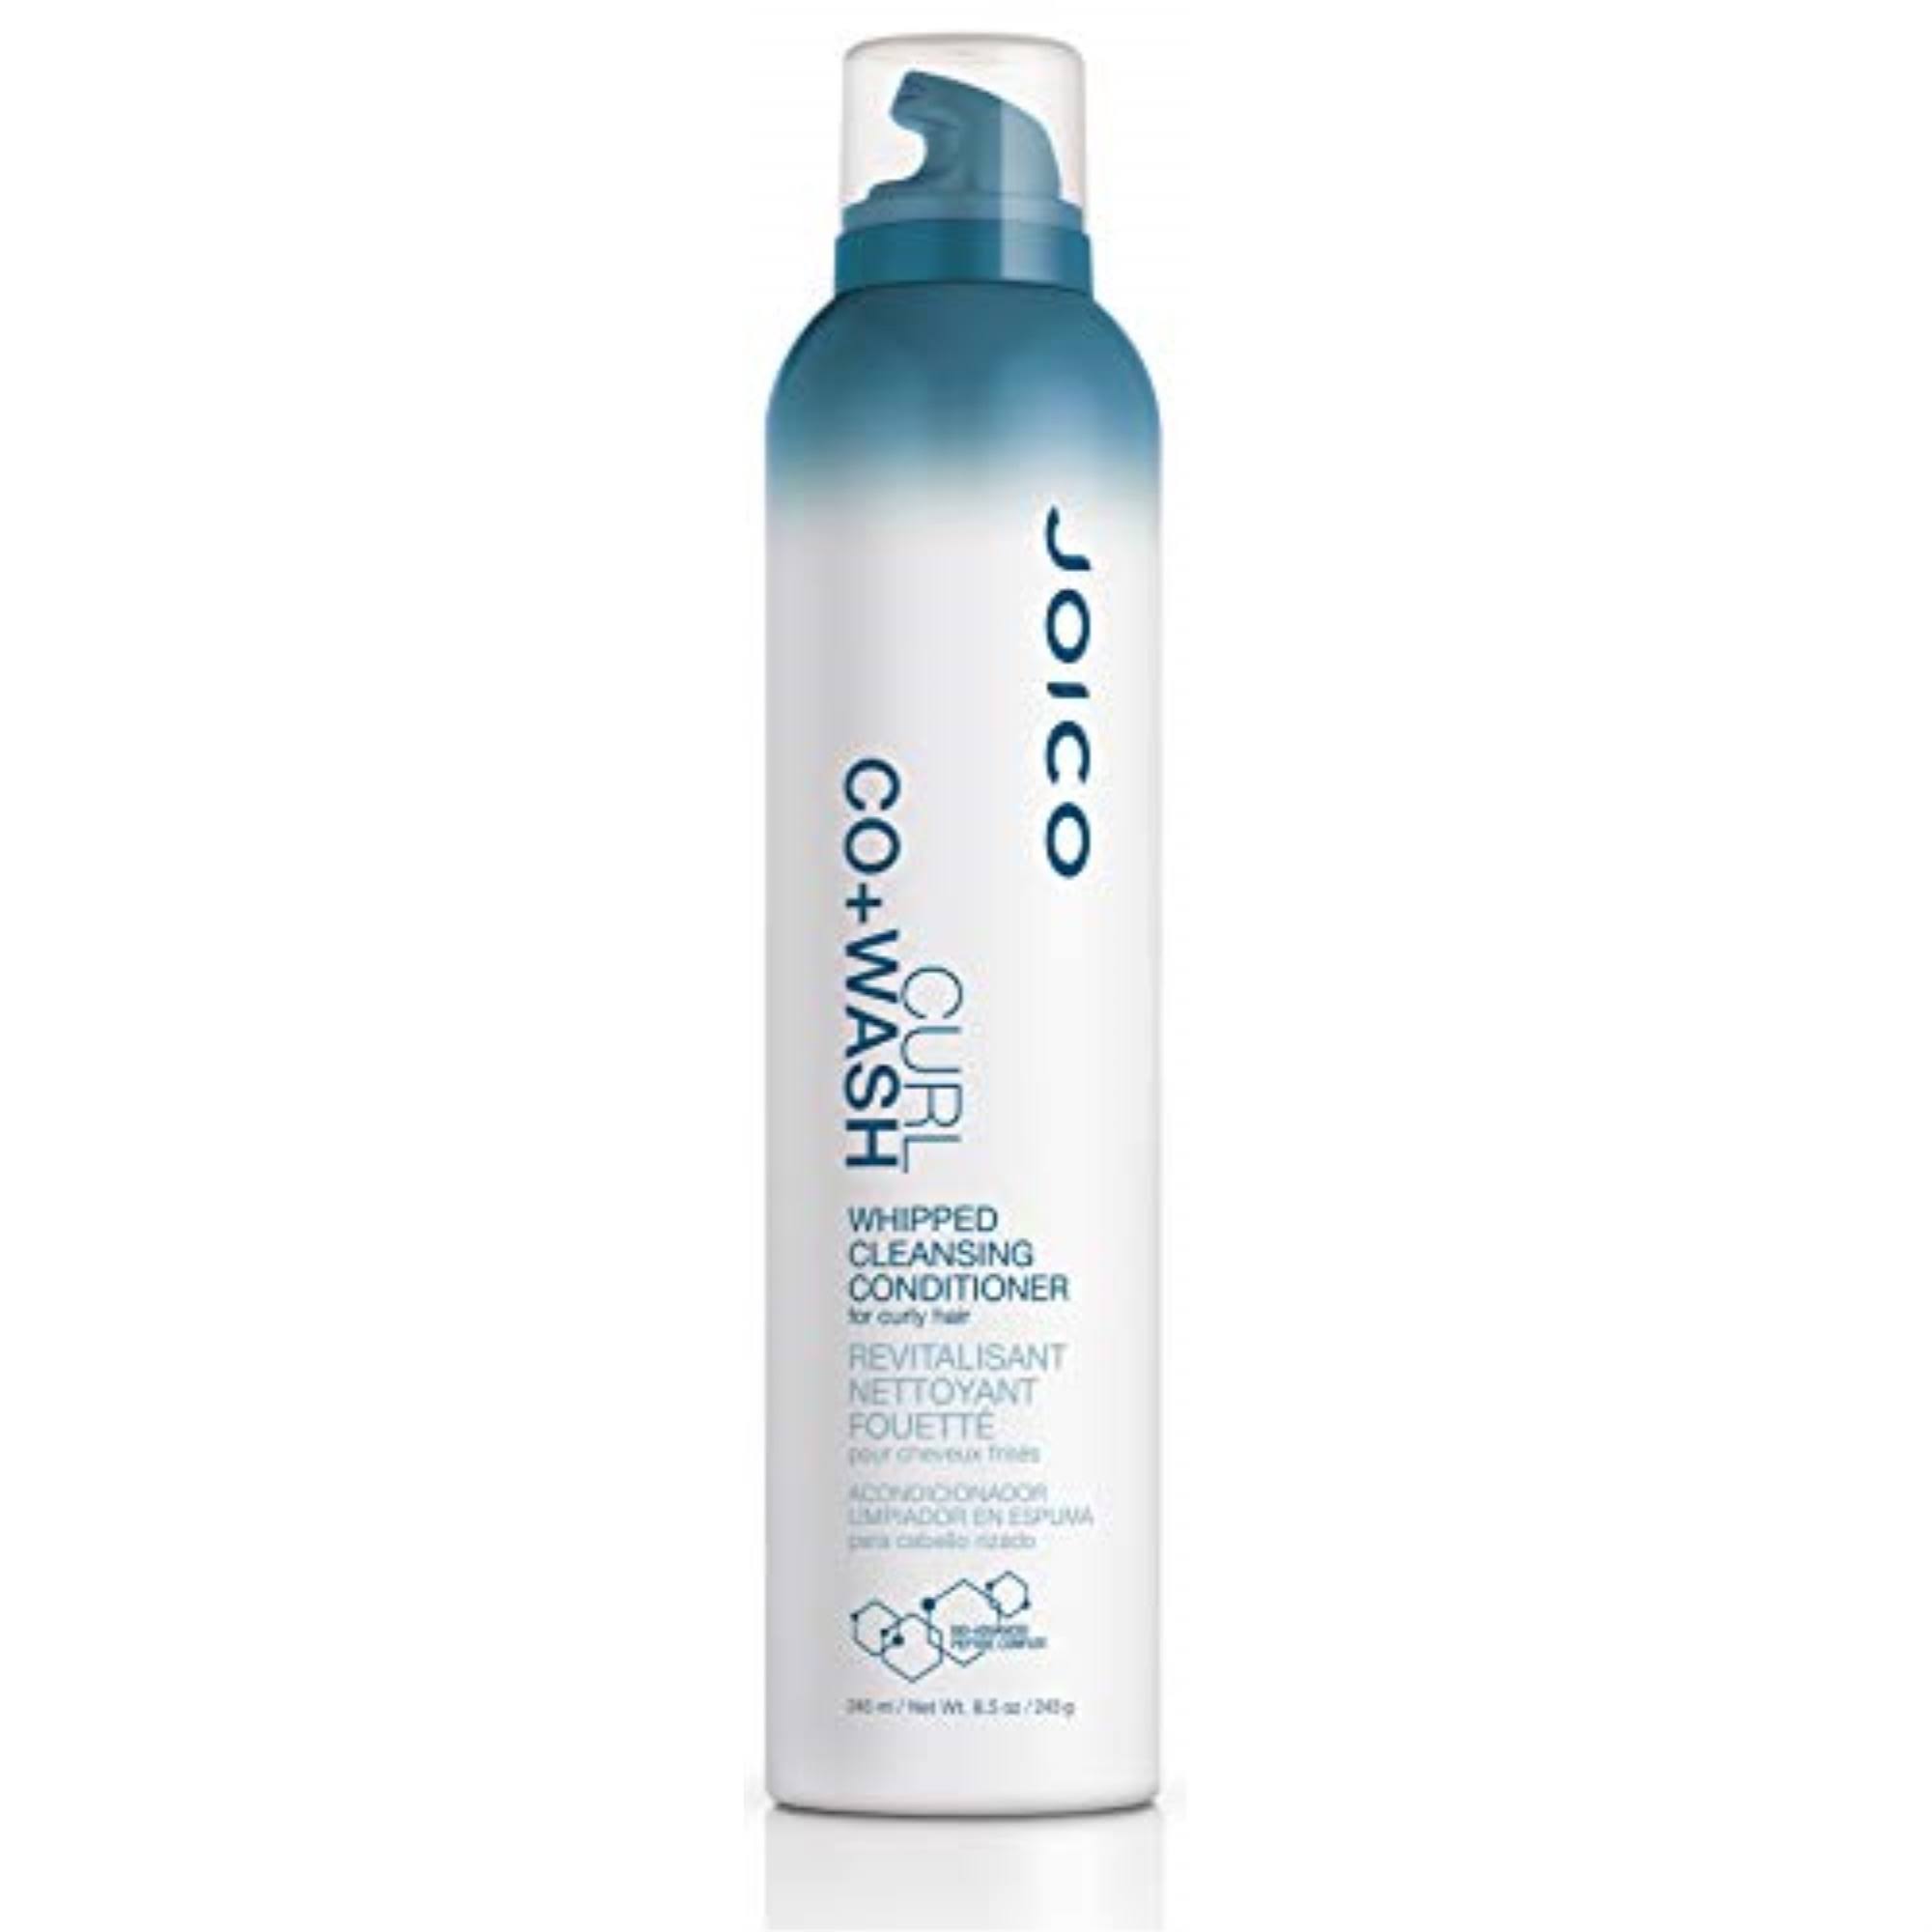 Joico Curl Co-wash Whipped Cleansing Conditioner for Curly Hair - 245ml